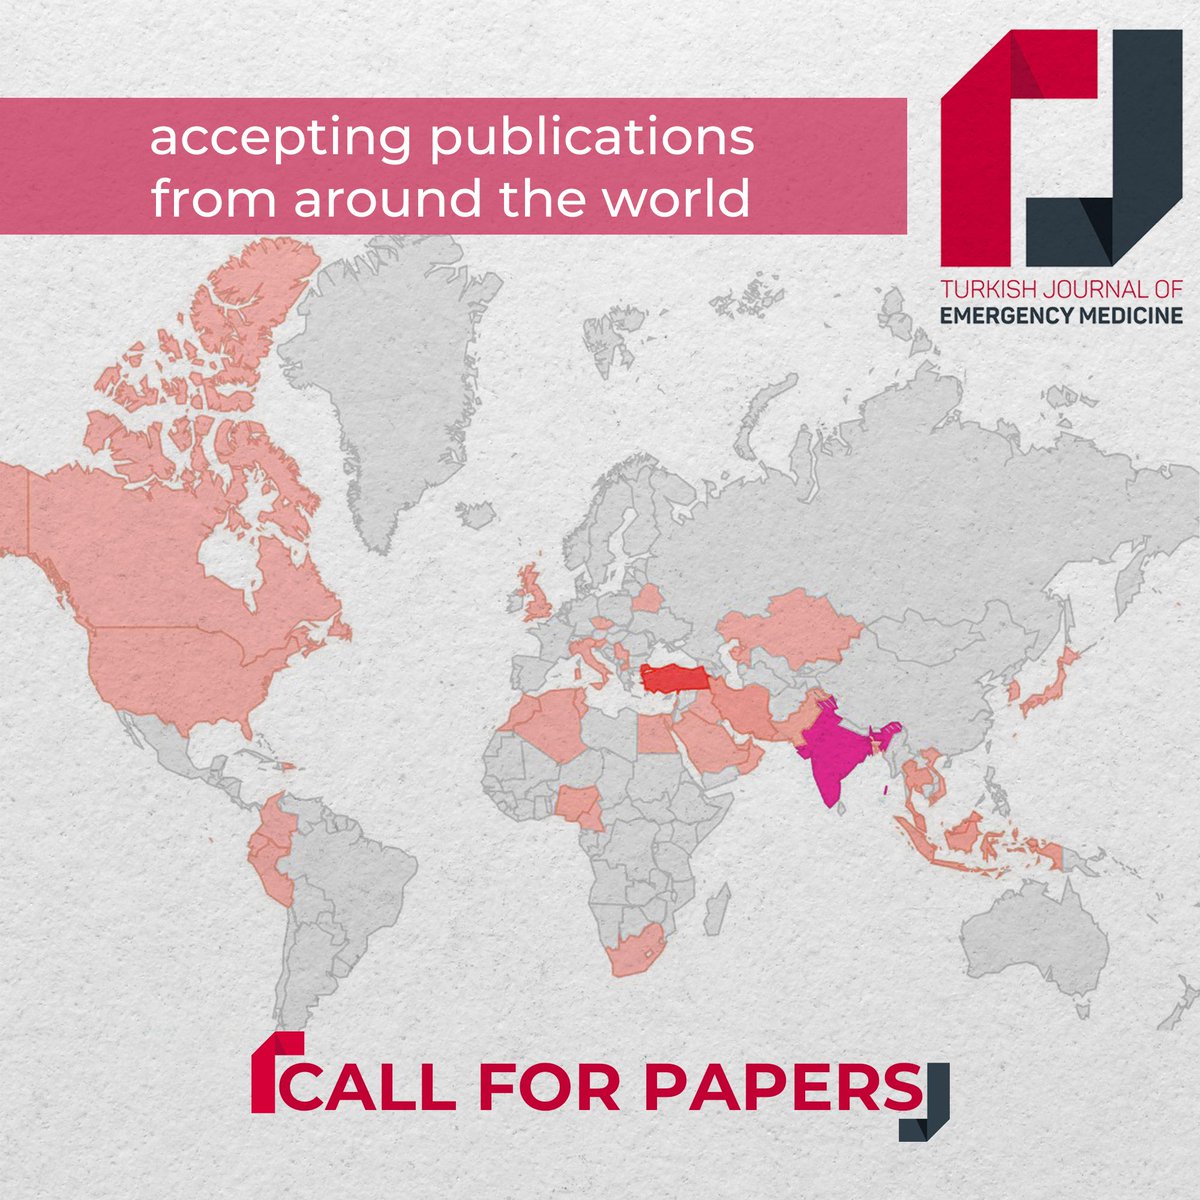 📢 Call for papers Turkish Journal of Emergency Medicine is accepting papers for emergency medicine and critical care all around the globe We invite you to submit your manuscripts Free to submit and free to publish #MedEd #OpenAccess #journal #emergencymedicine #criticalcare